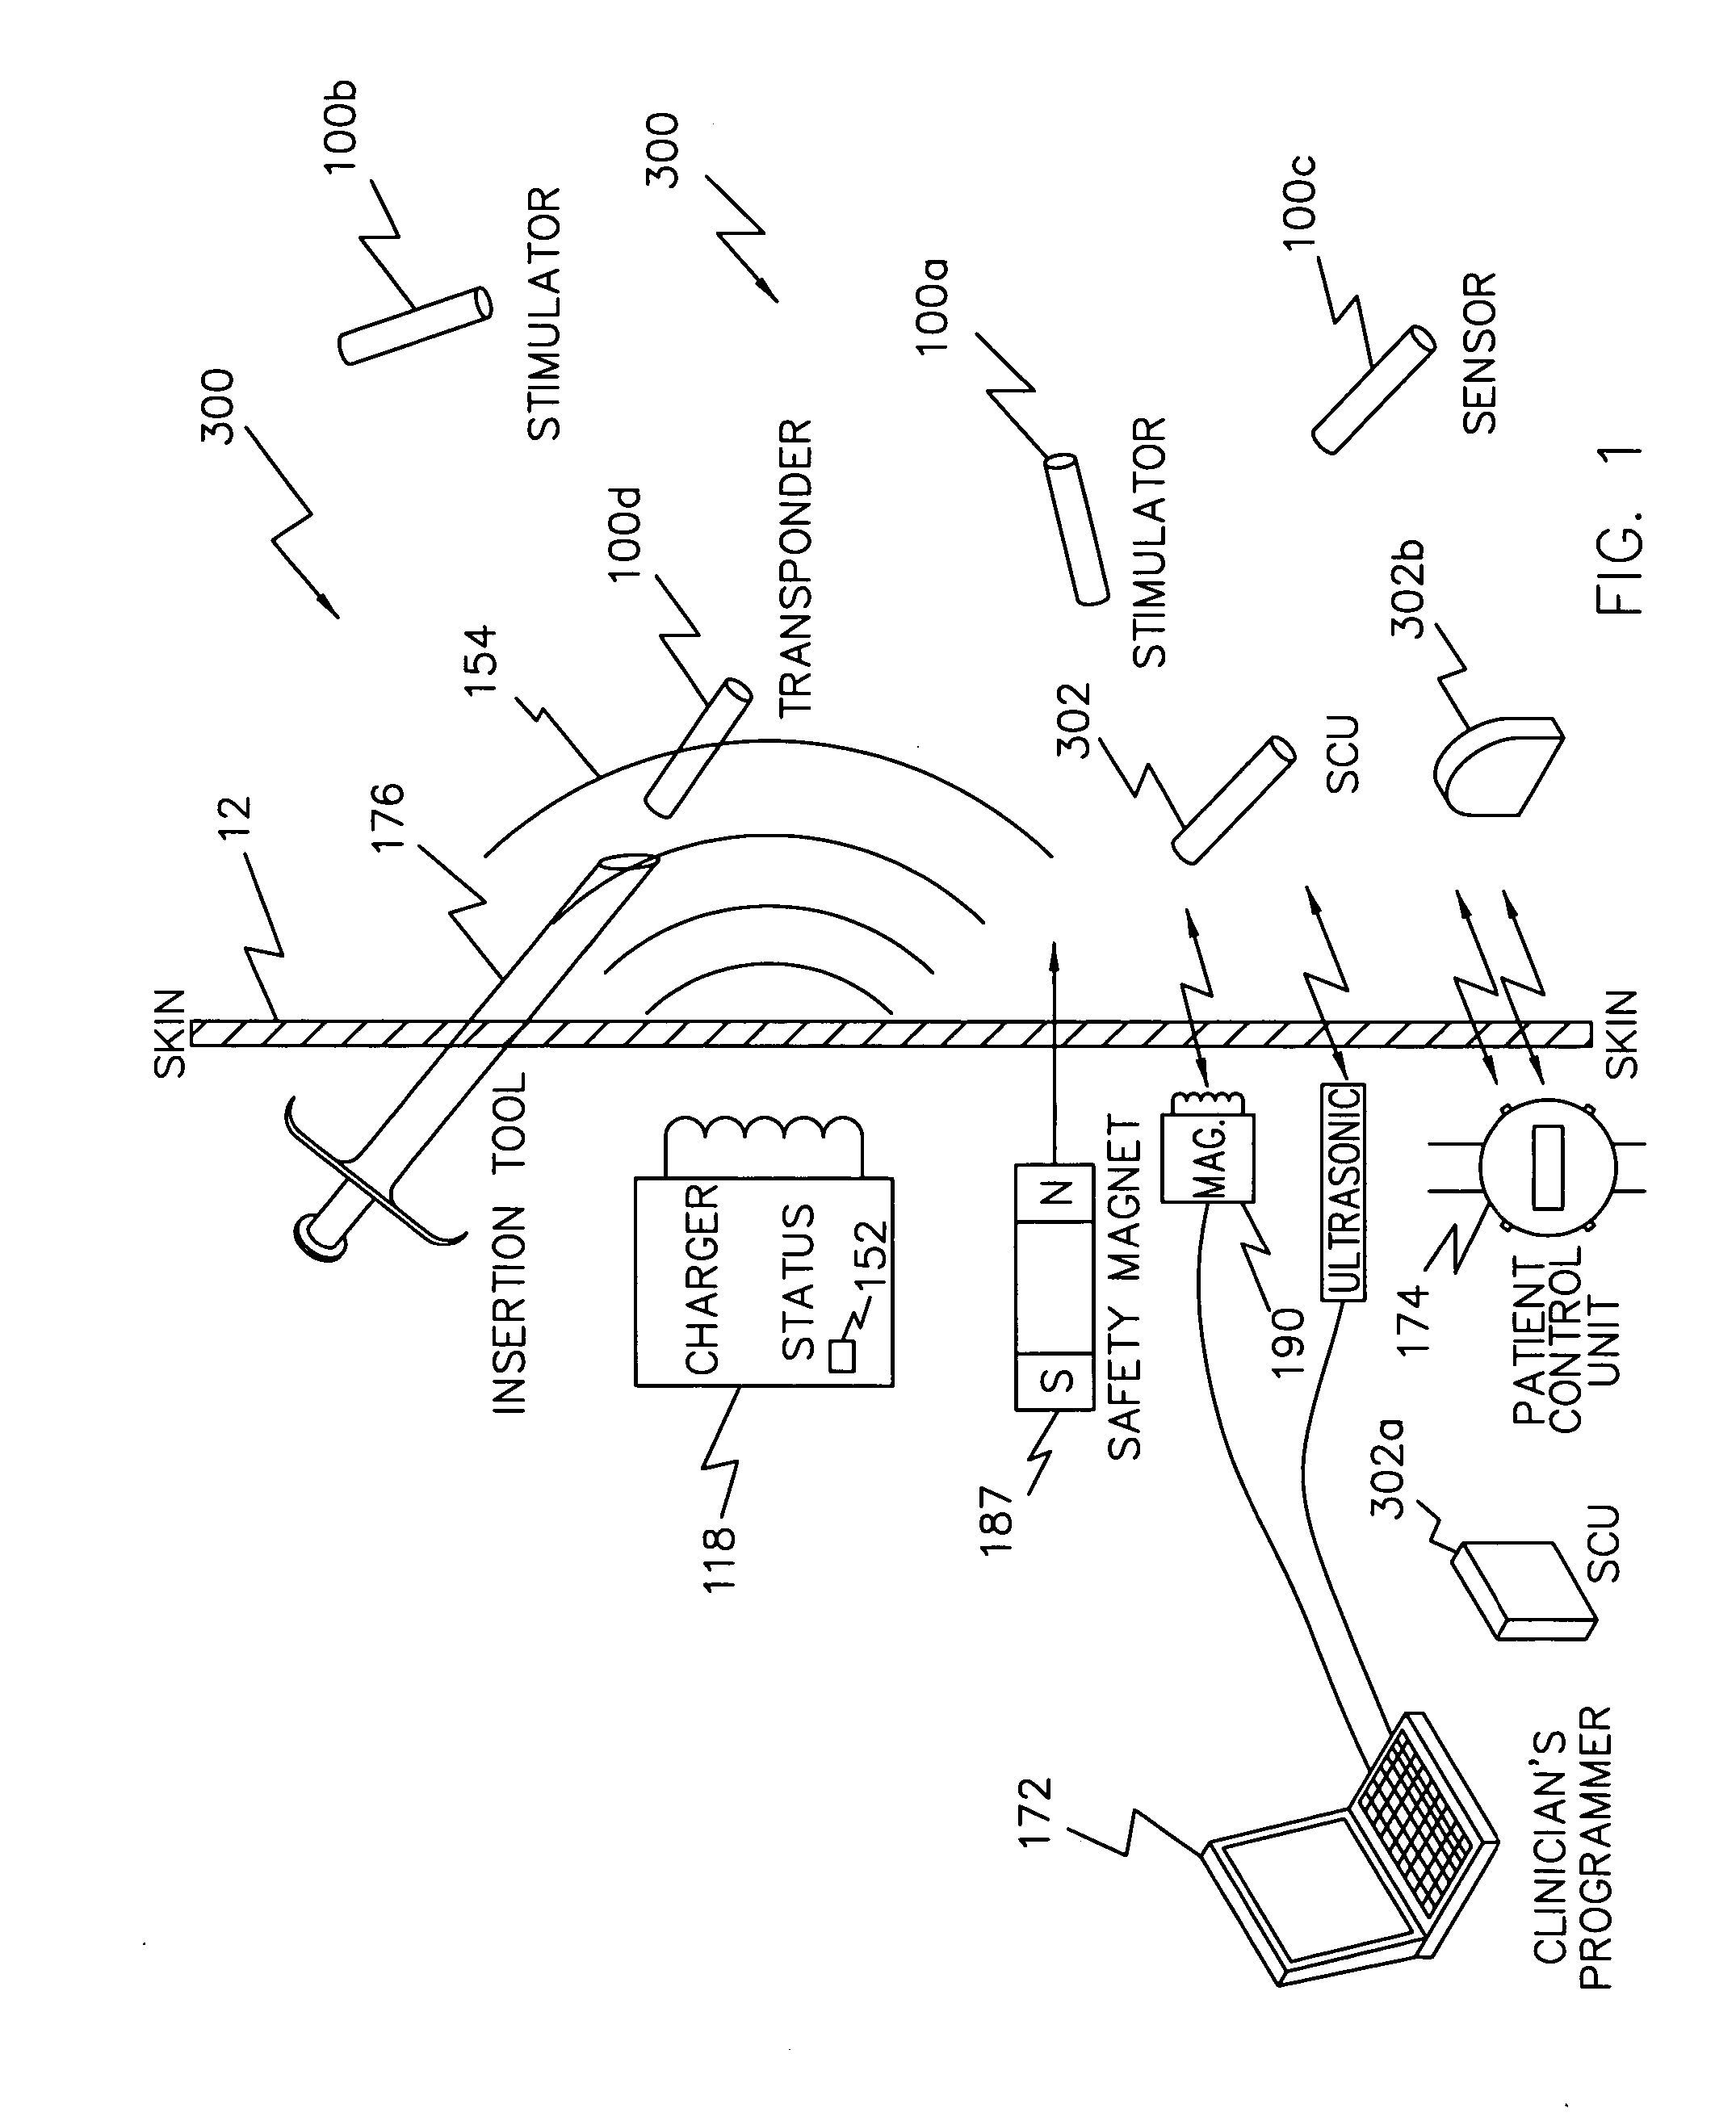 Stent having an integral ultrasonic emitter for preventing restenosis following a stent procedure